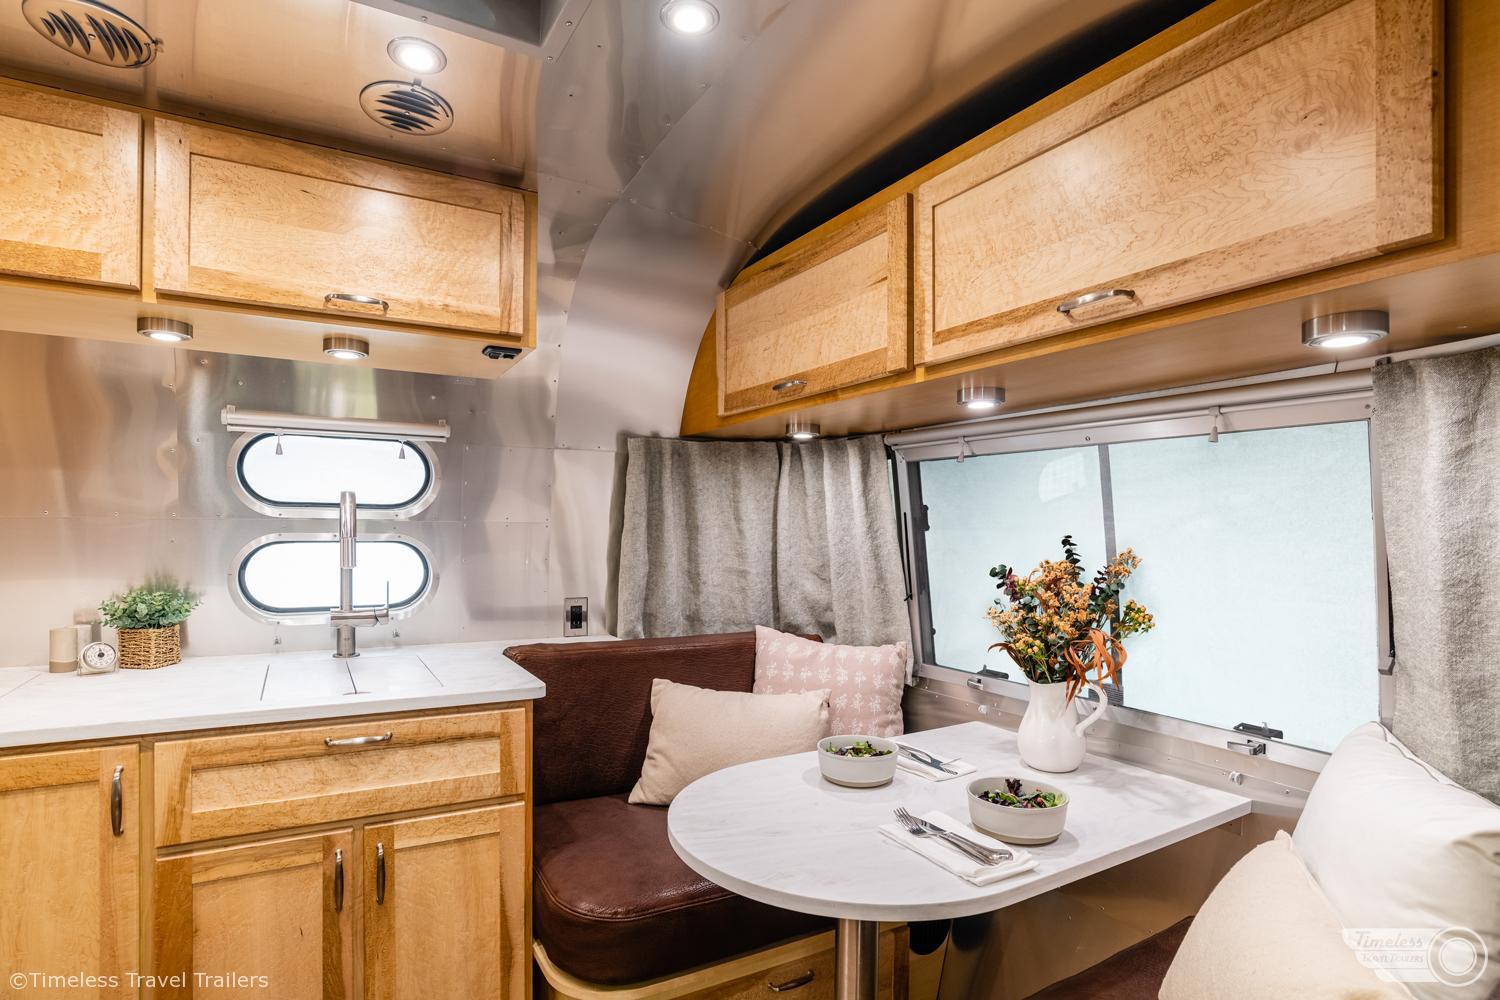 Timeless Travel Trailers - Airstream's most experienced authorized